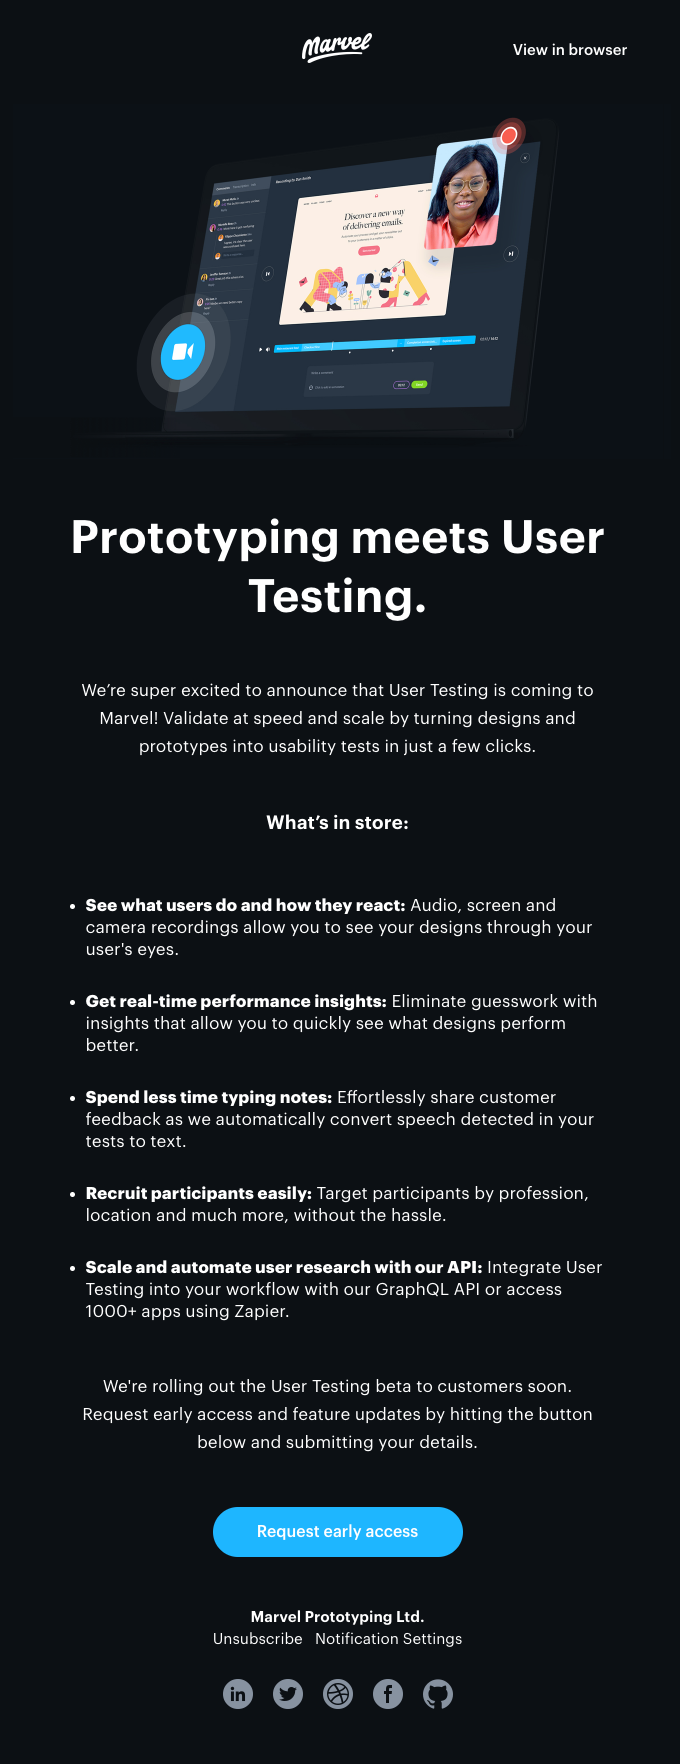 User Testing will be coming to Marvel